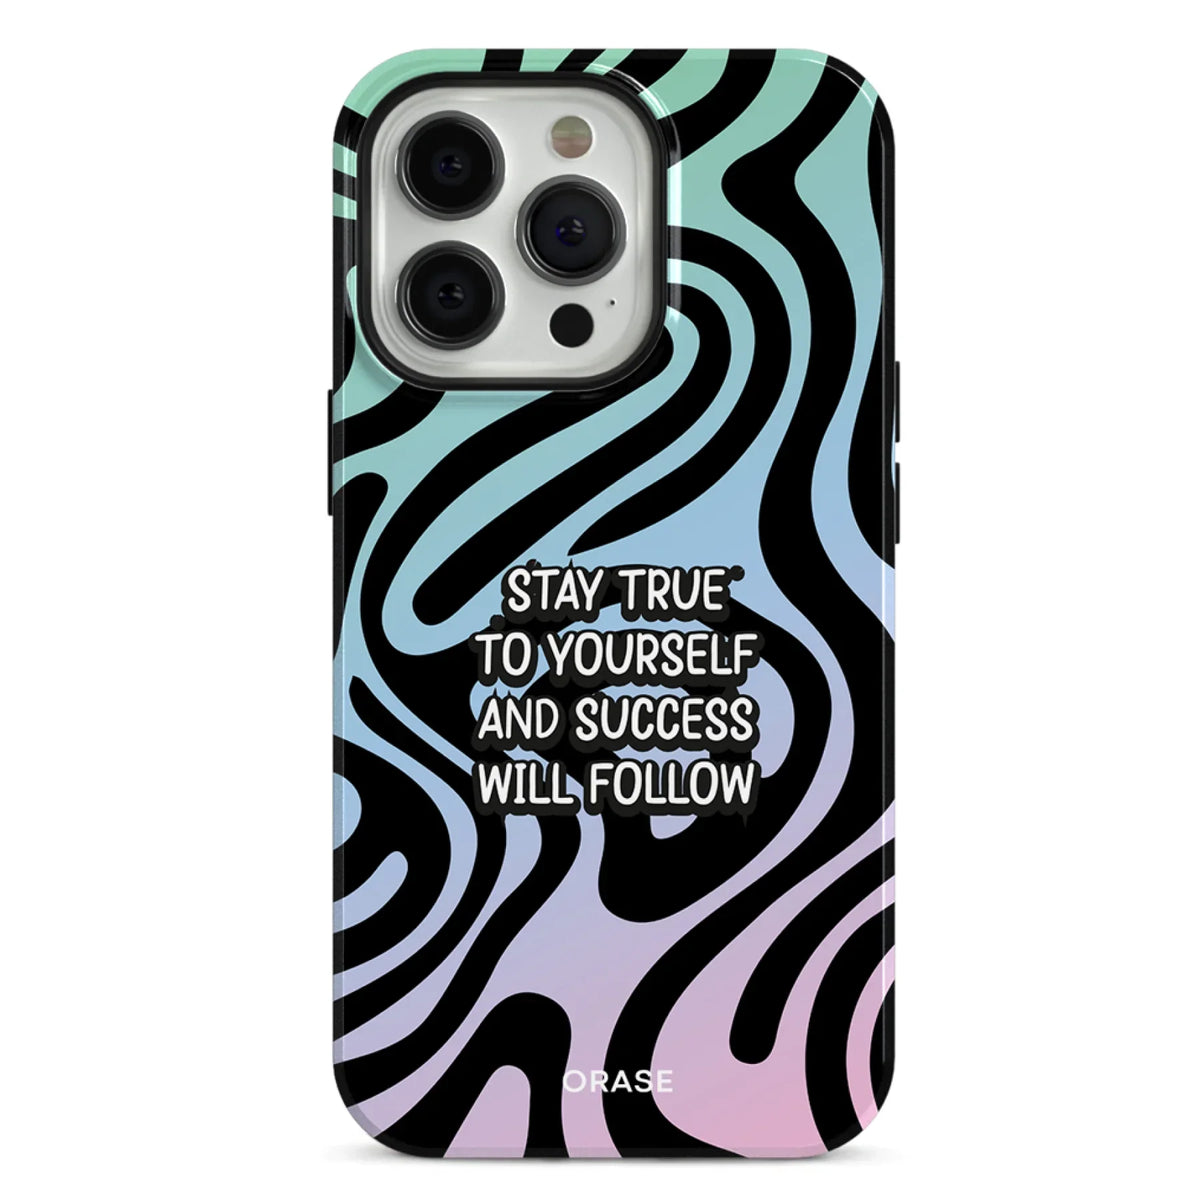 Stay True to Yourself iPhone Case - iPhone 11 Pro Max